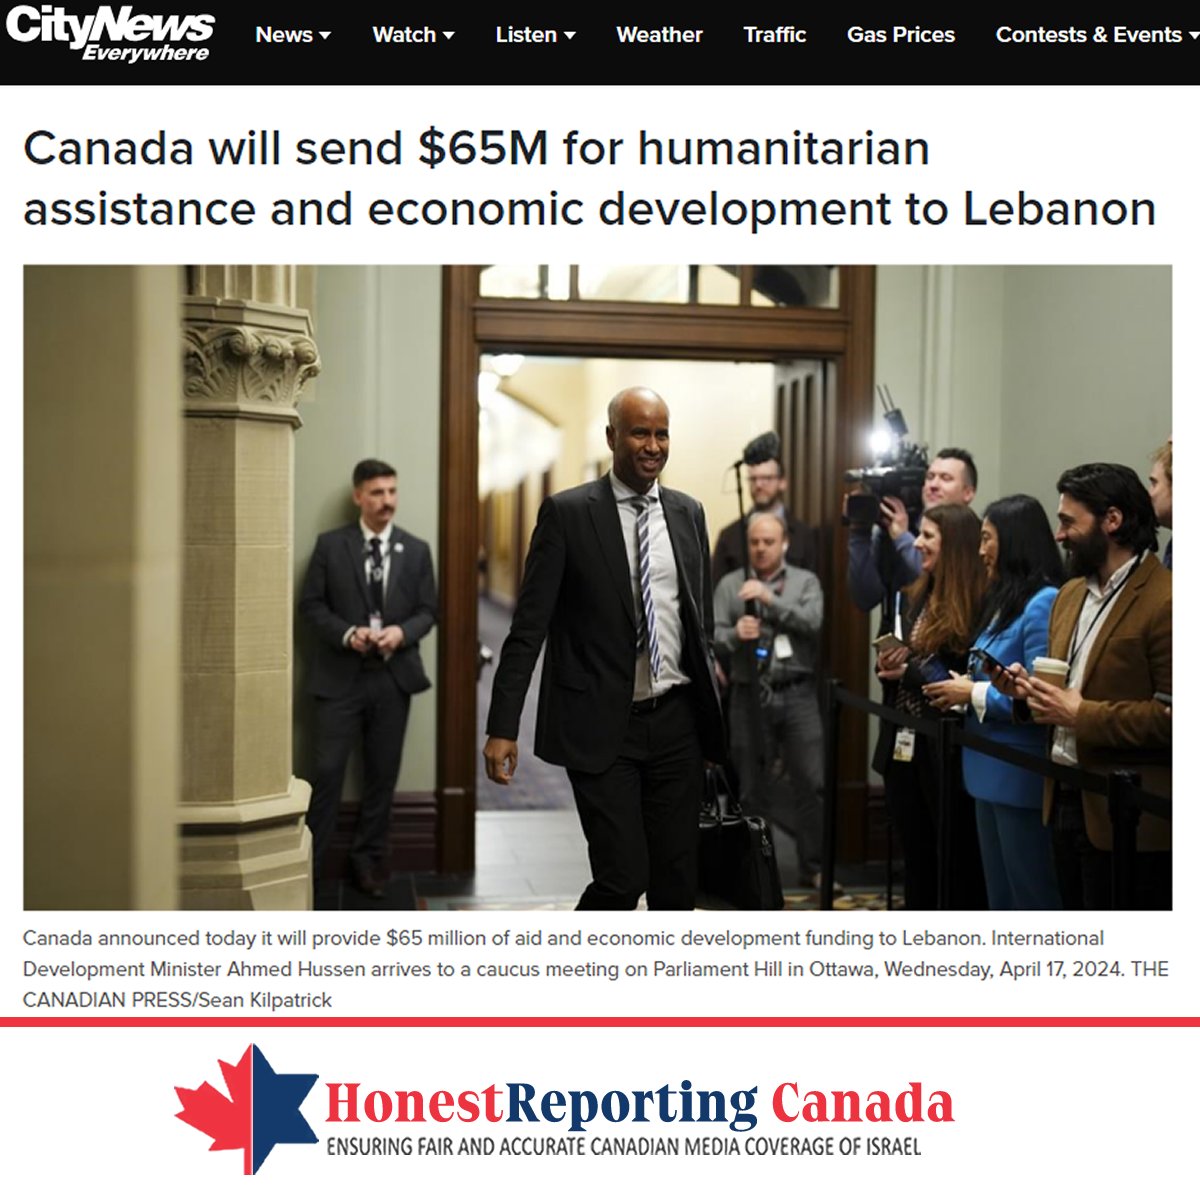 Hey @HonAhmedHussen, just wondering, will you call on Lebanese authorities to disarm & disband Hezbollah terrorists who have fired over 3,000 rockets at Israel in recent months? Shouldn't Canada's humanitarian assistance to Lebanon be conditional on Lebanon taking efforts to…